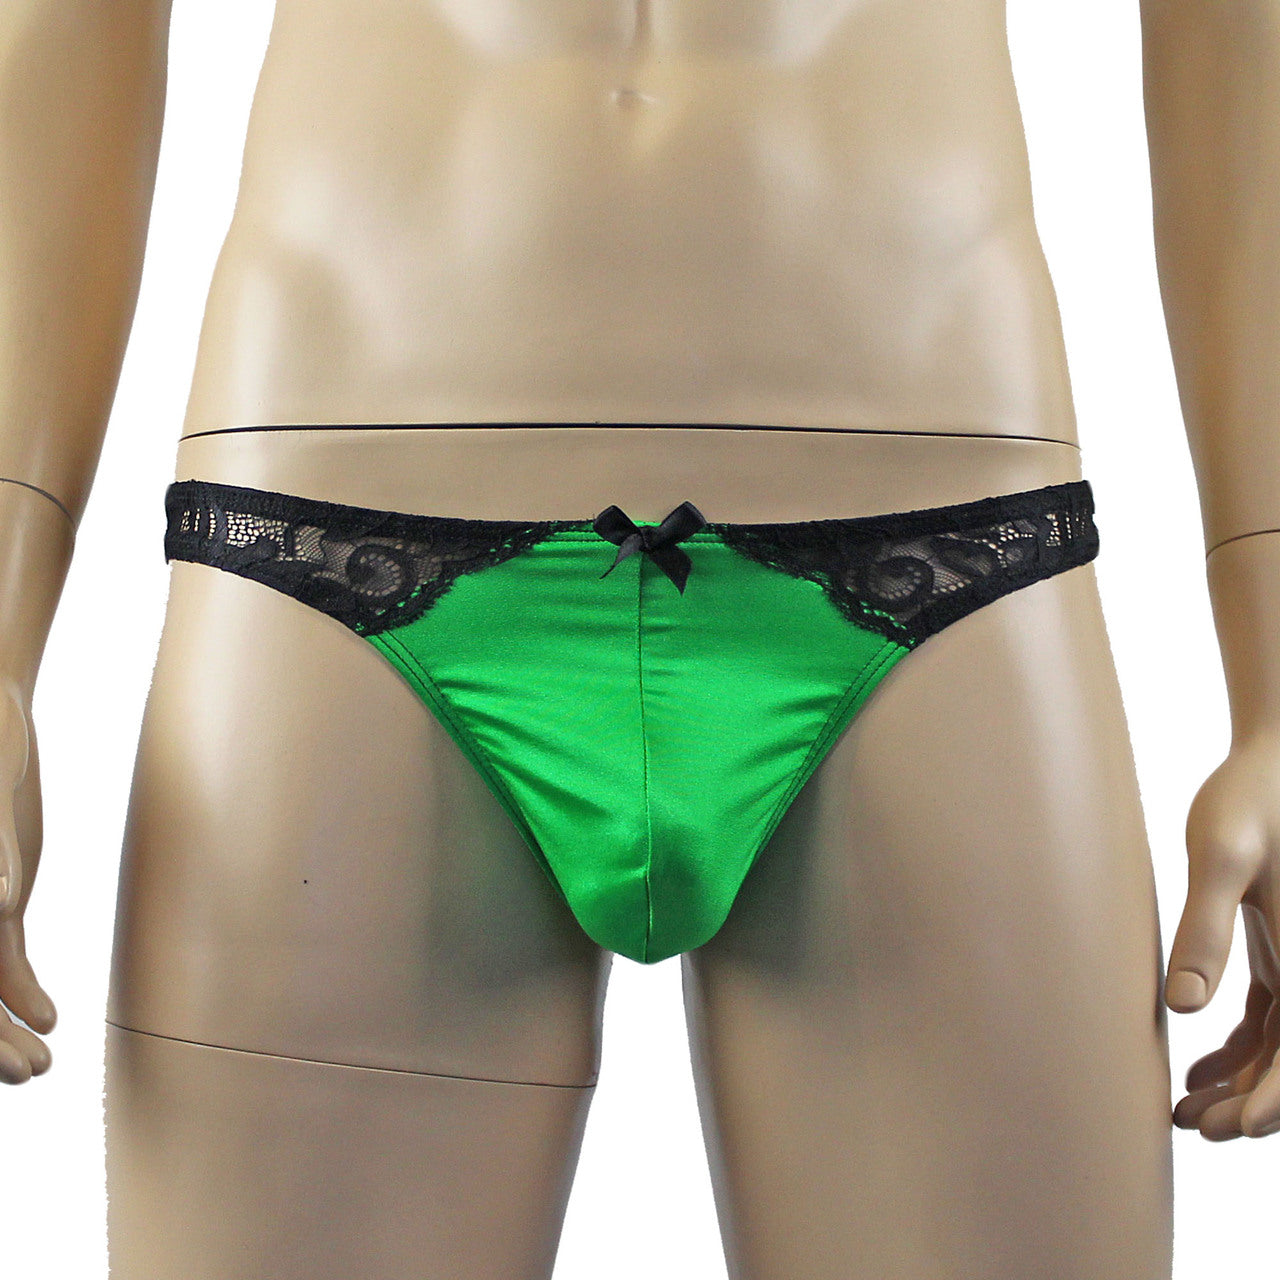 Mens Risque G string Thong (green and black plus other colours)